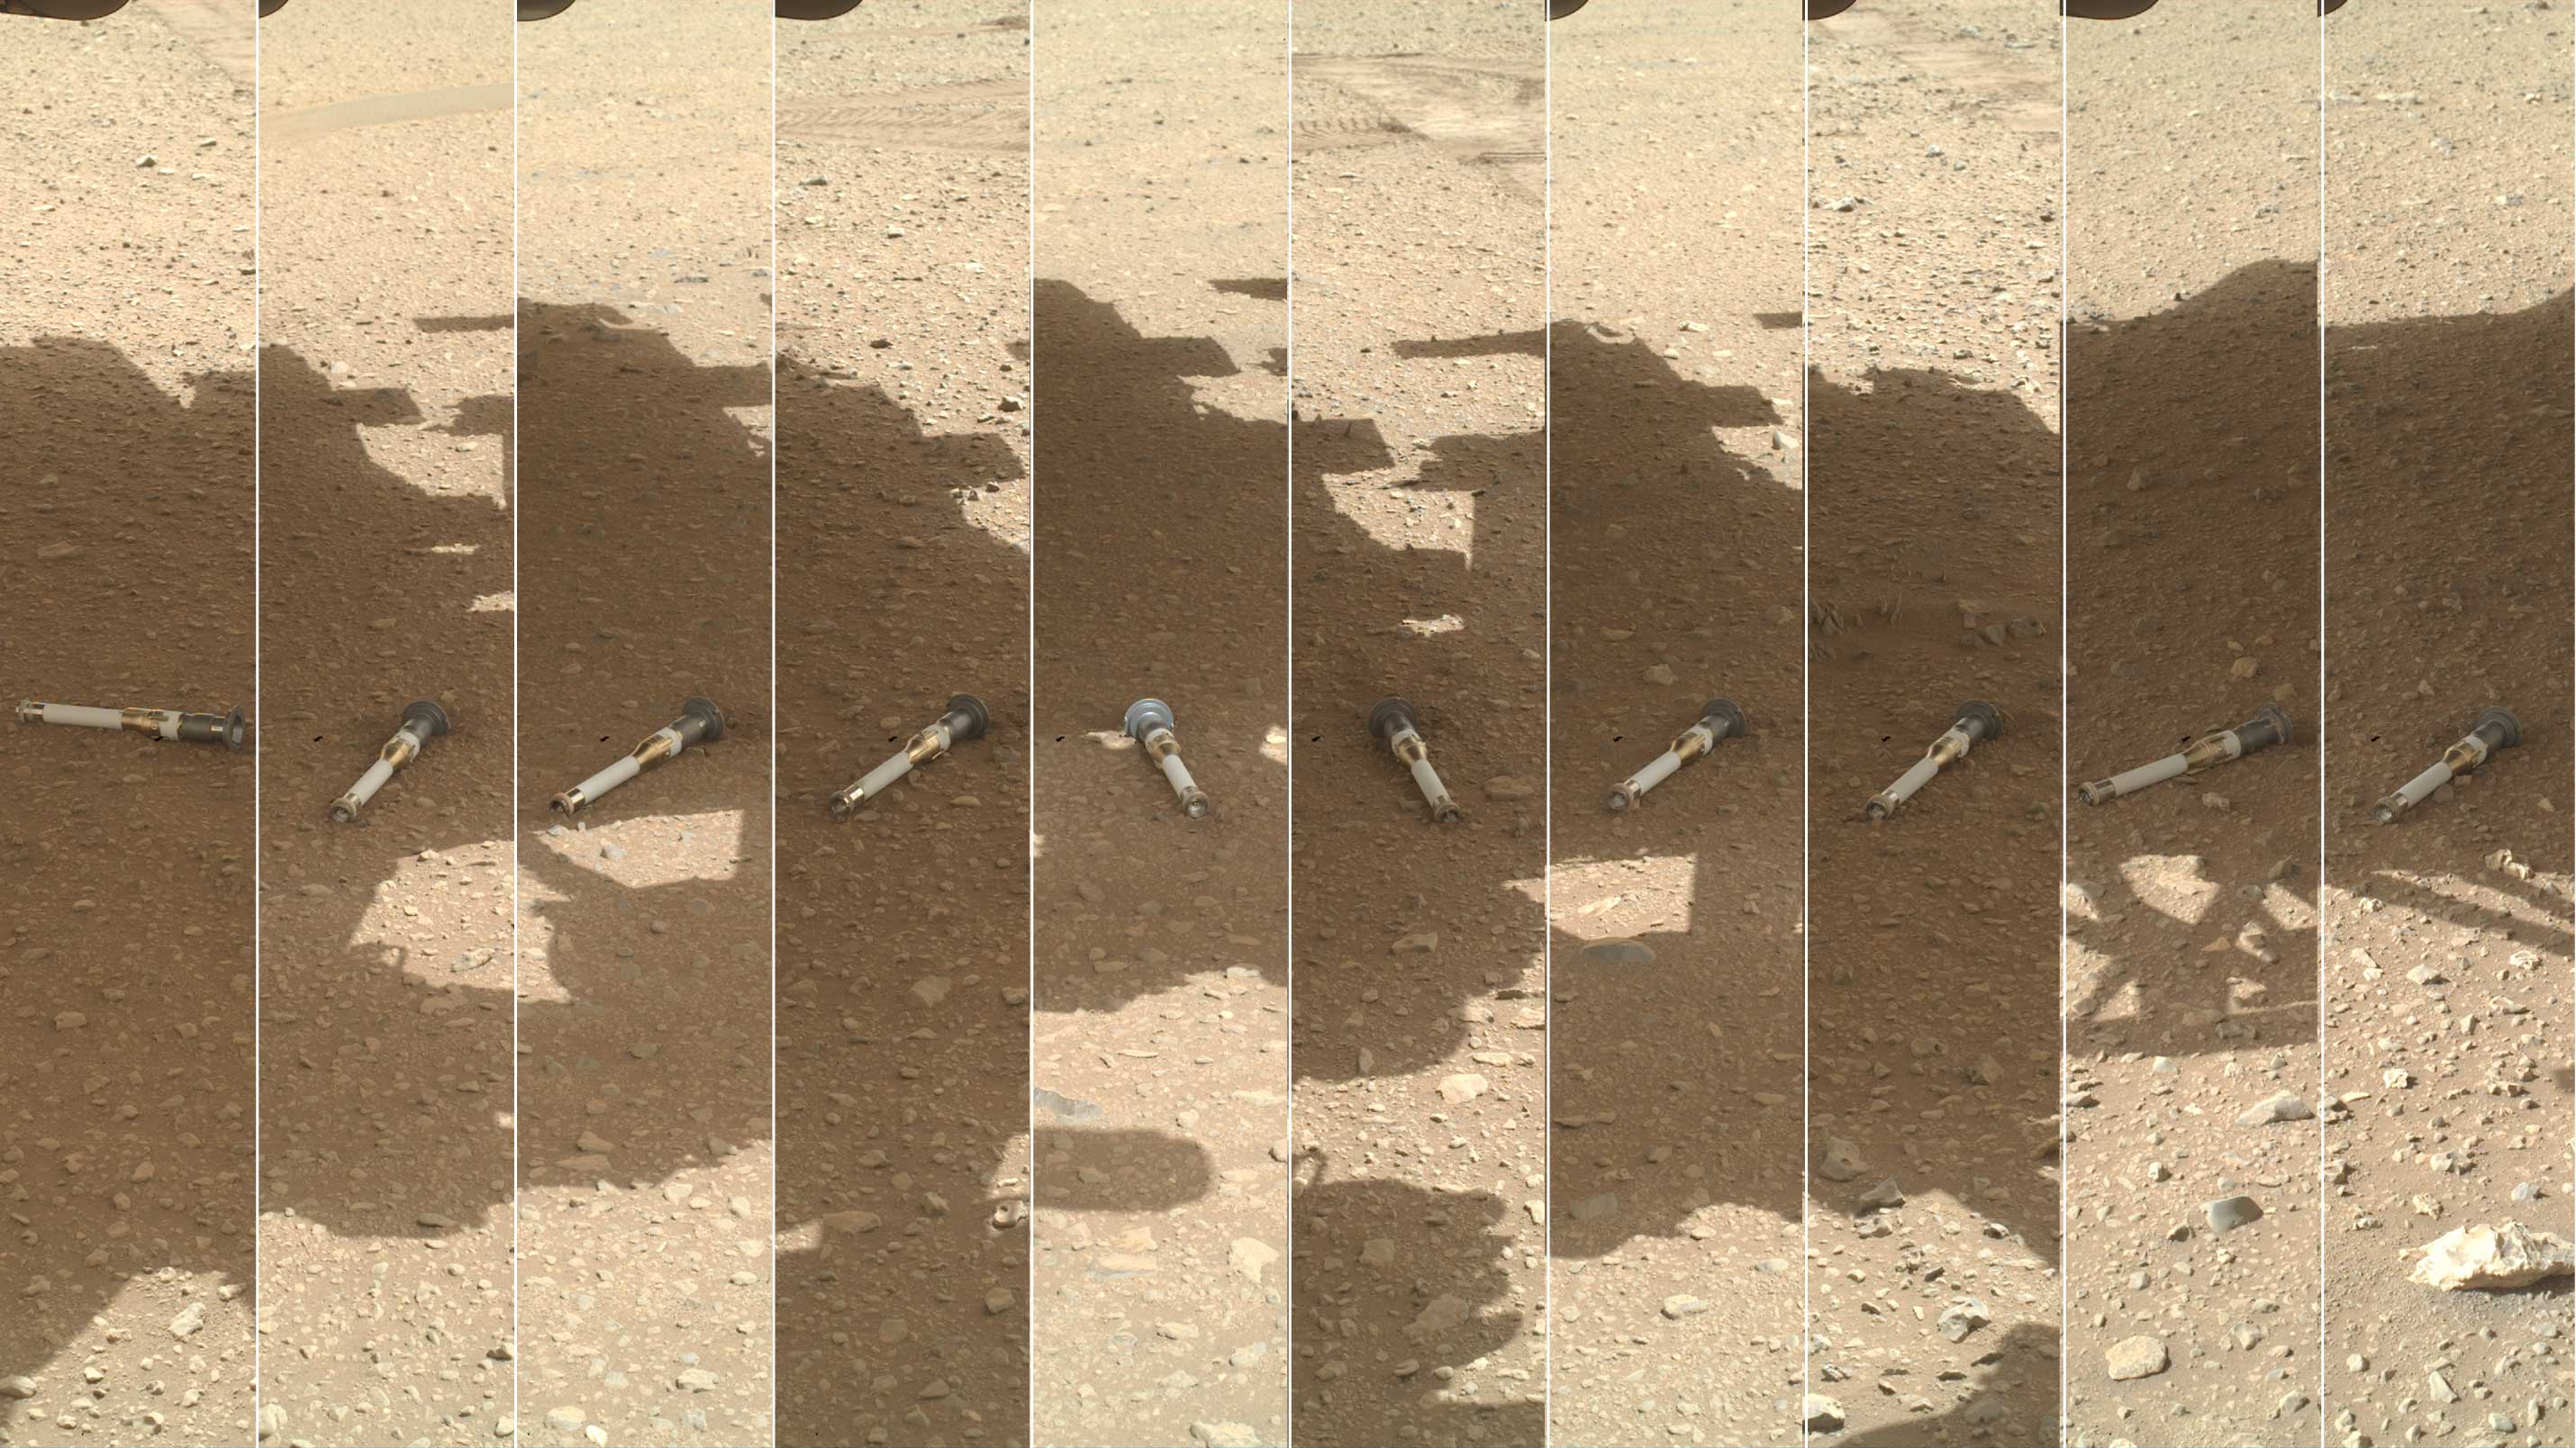 Nine small tubes lay in the shadow of the rover on the surface of Mars.